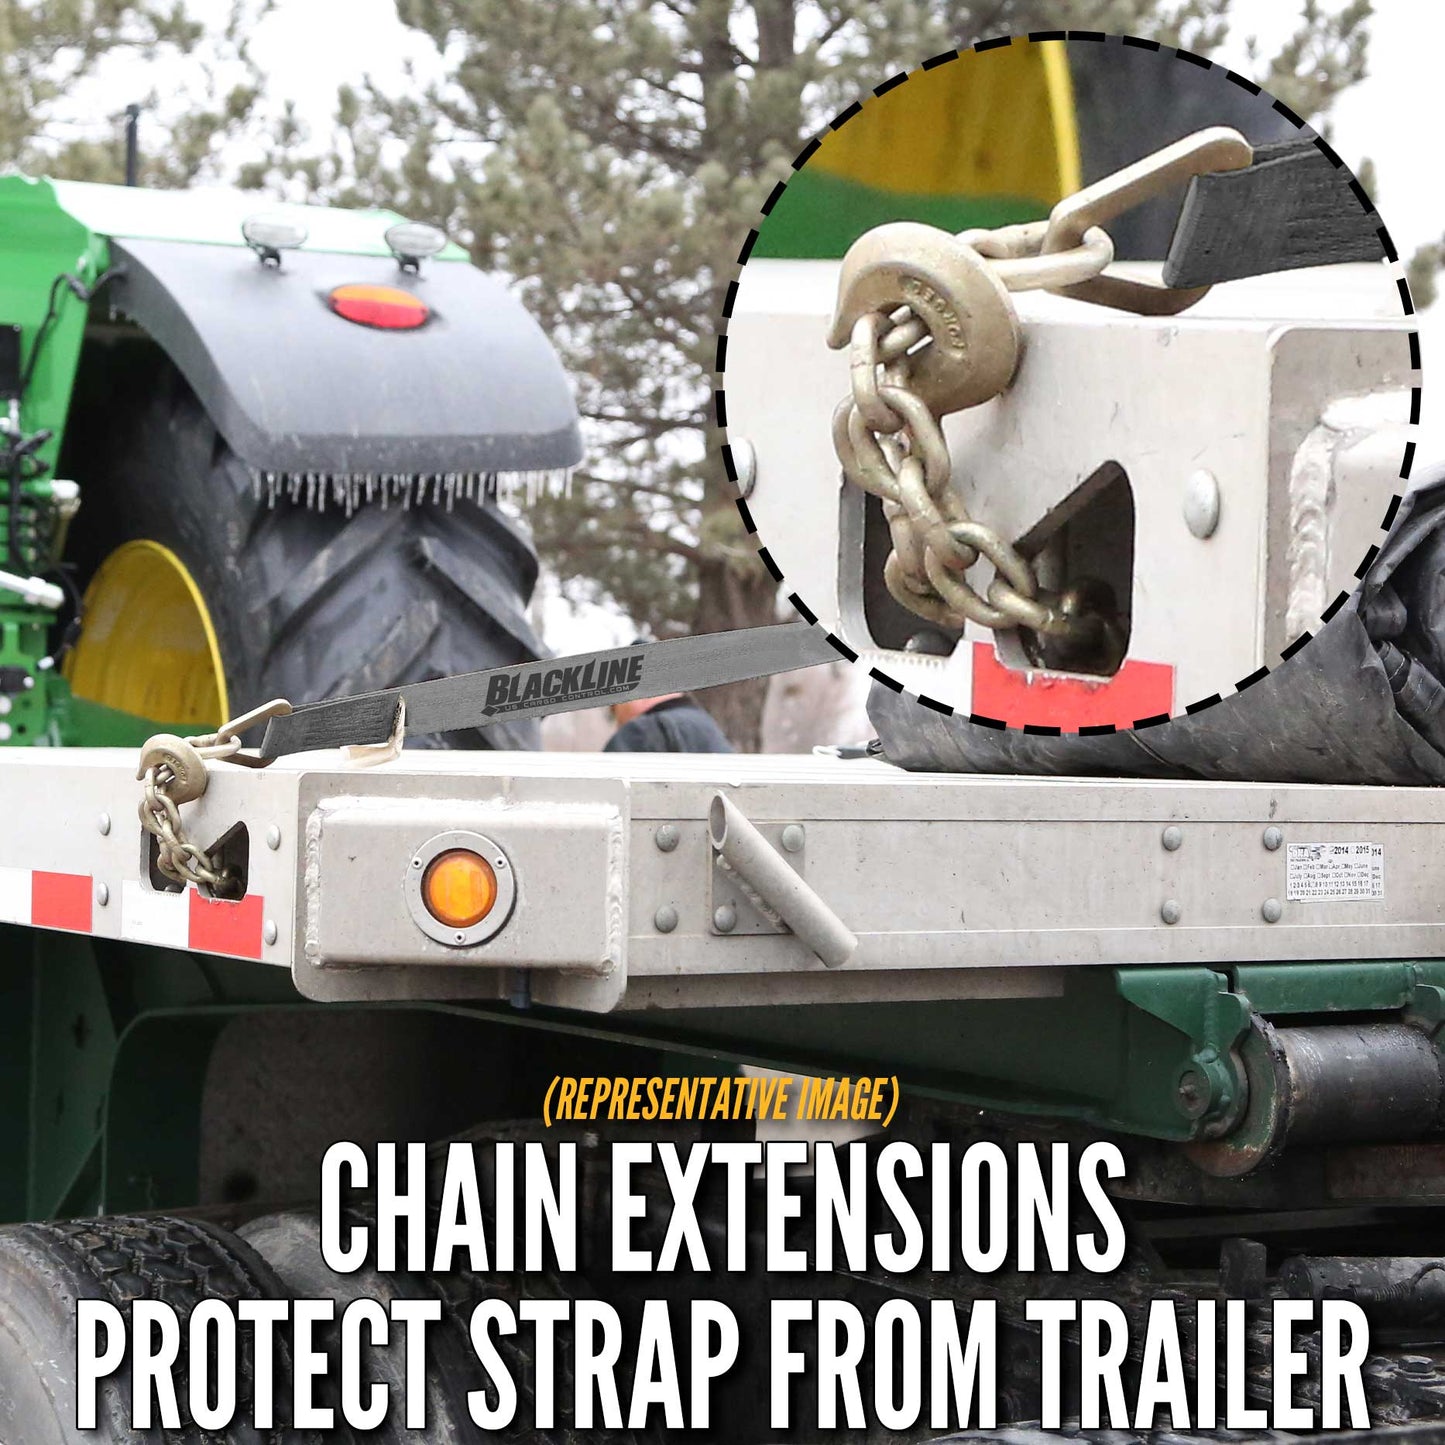 BlackLine chain extensions protect strap